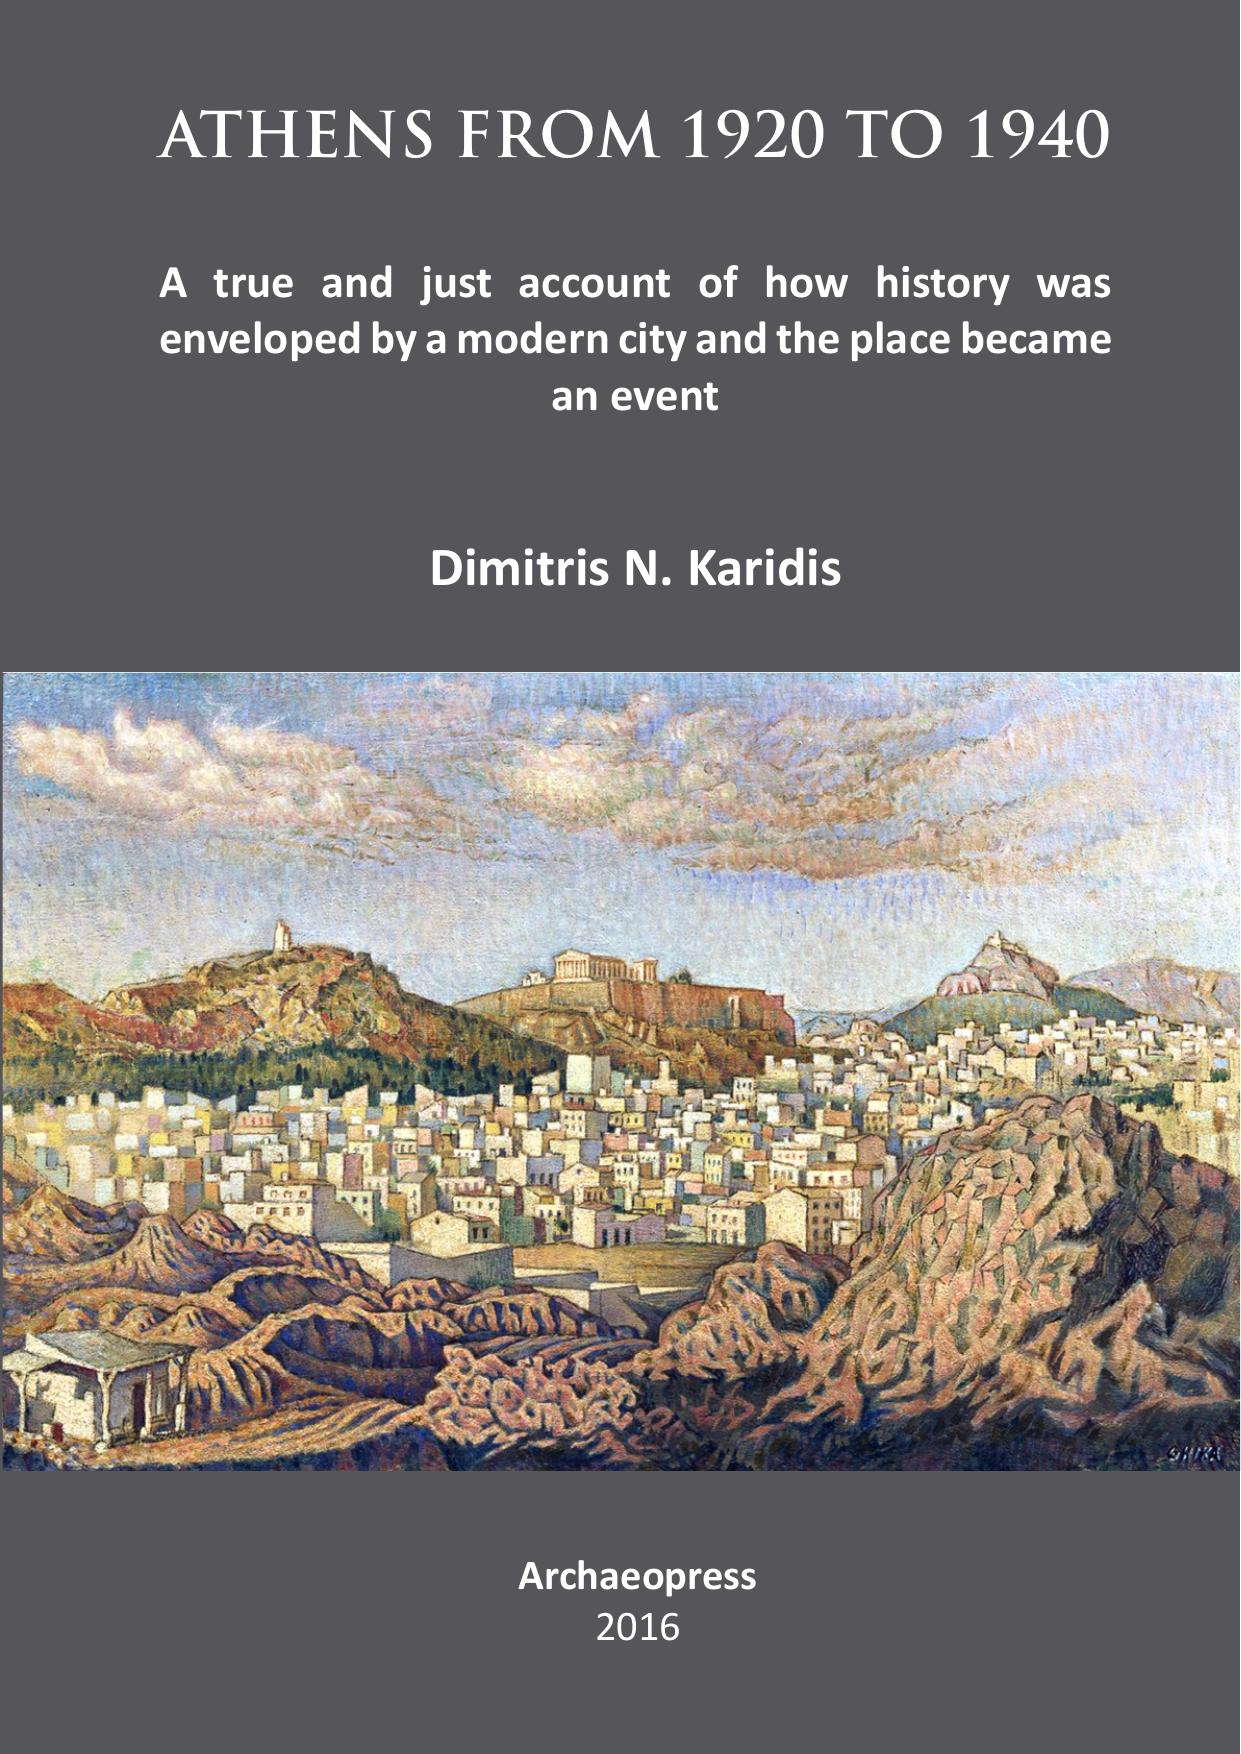 Athens from 1920 To 1940: A True and Just Account of How History Was Enveloped by a Modern City and the Place Became an Event by Dimitris N. Karidis